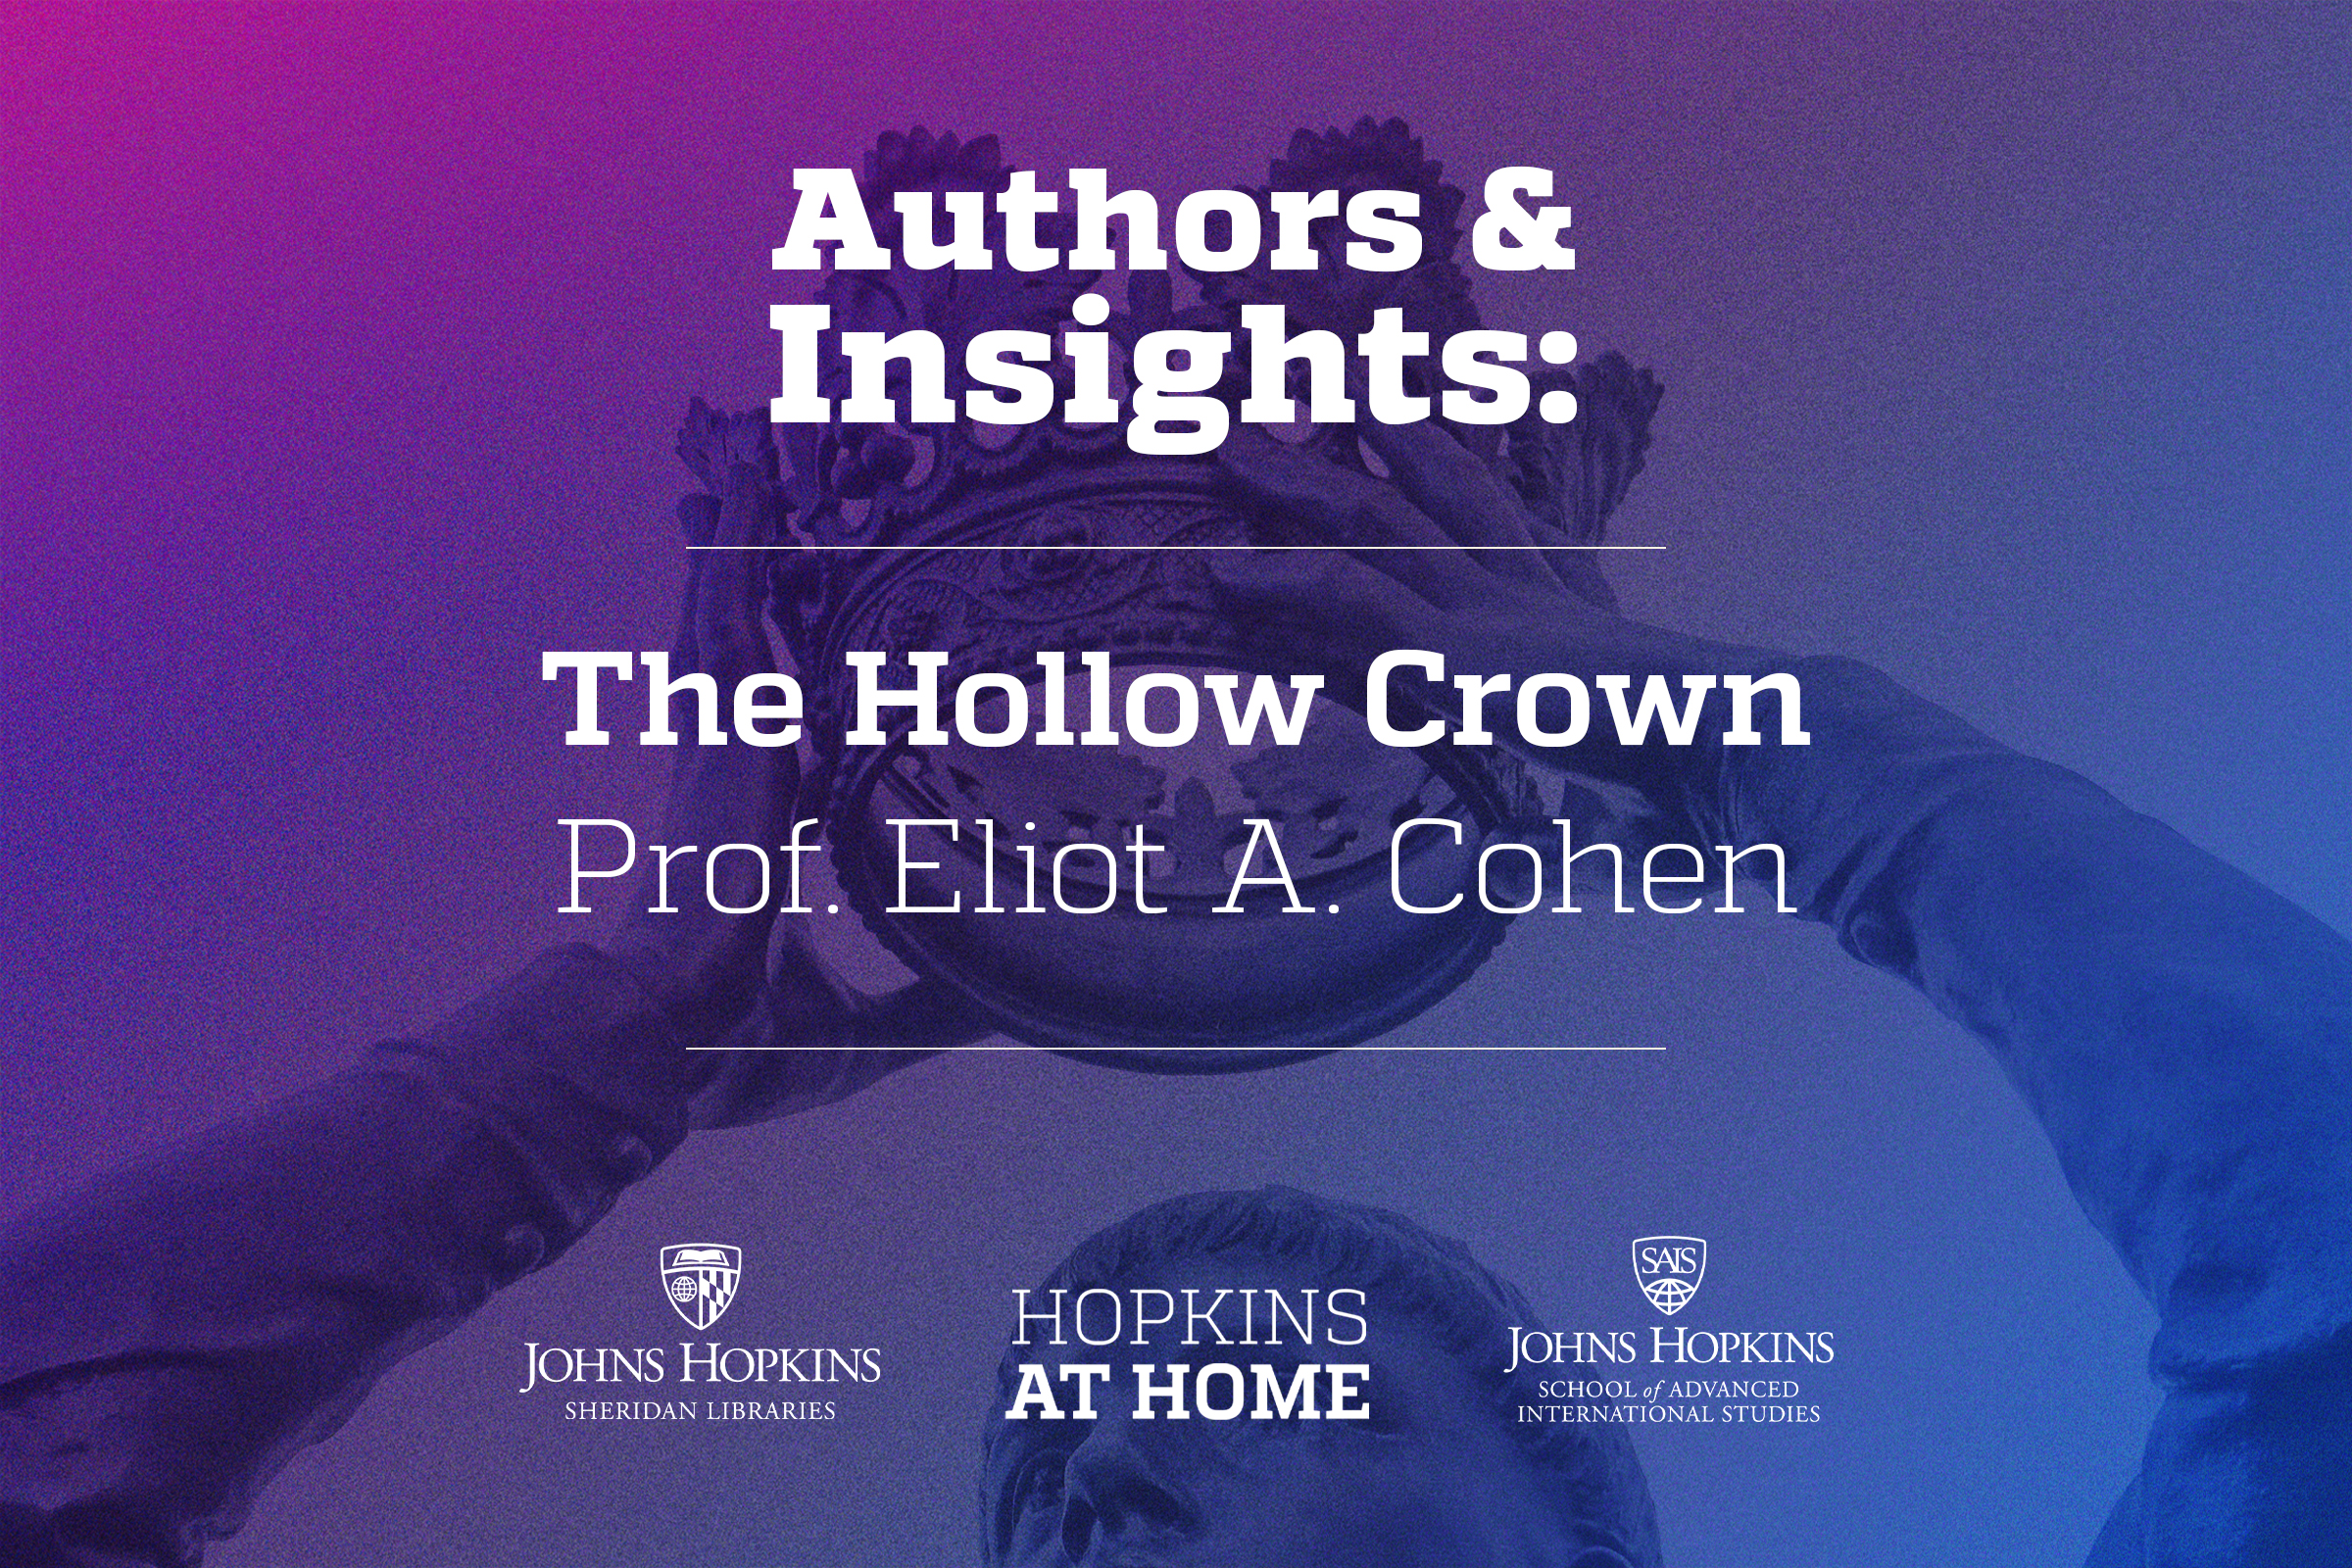 Authors & Insights: The Hollow Crown, with Prof. Eliot A. Cohen